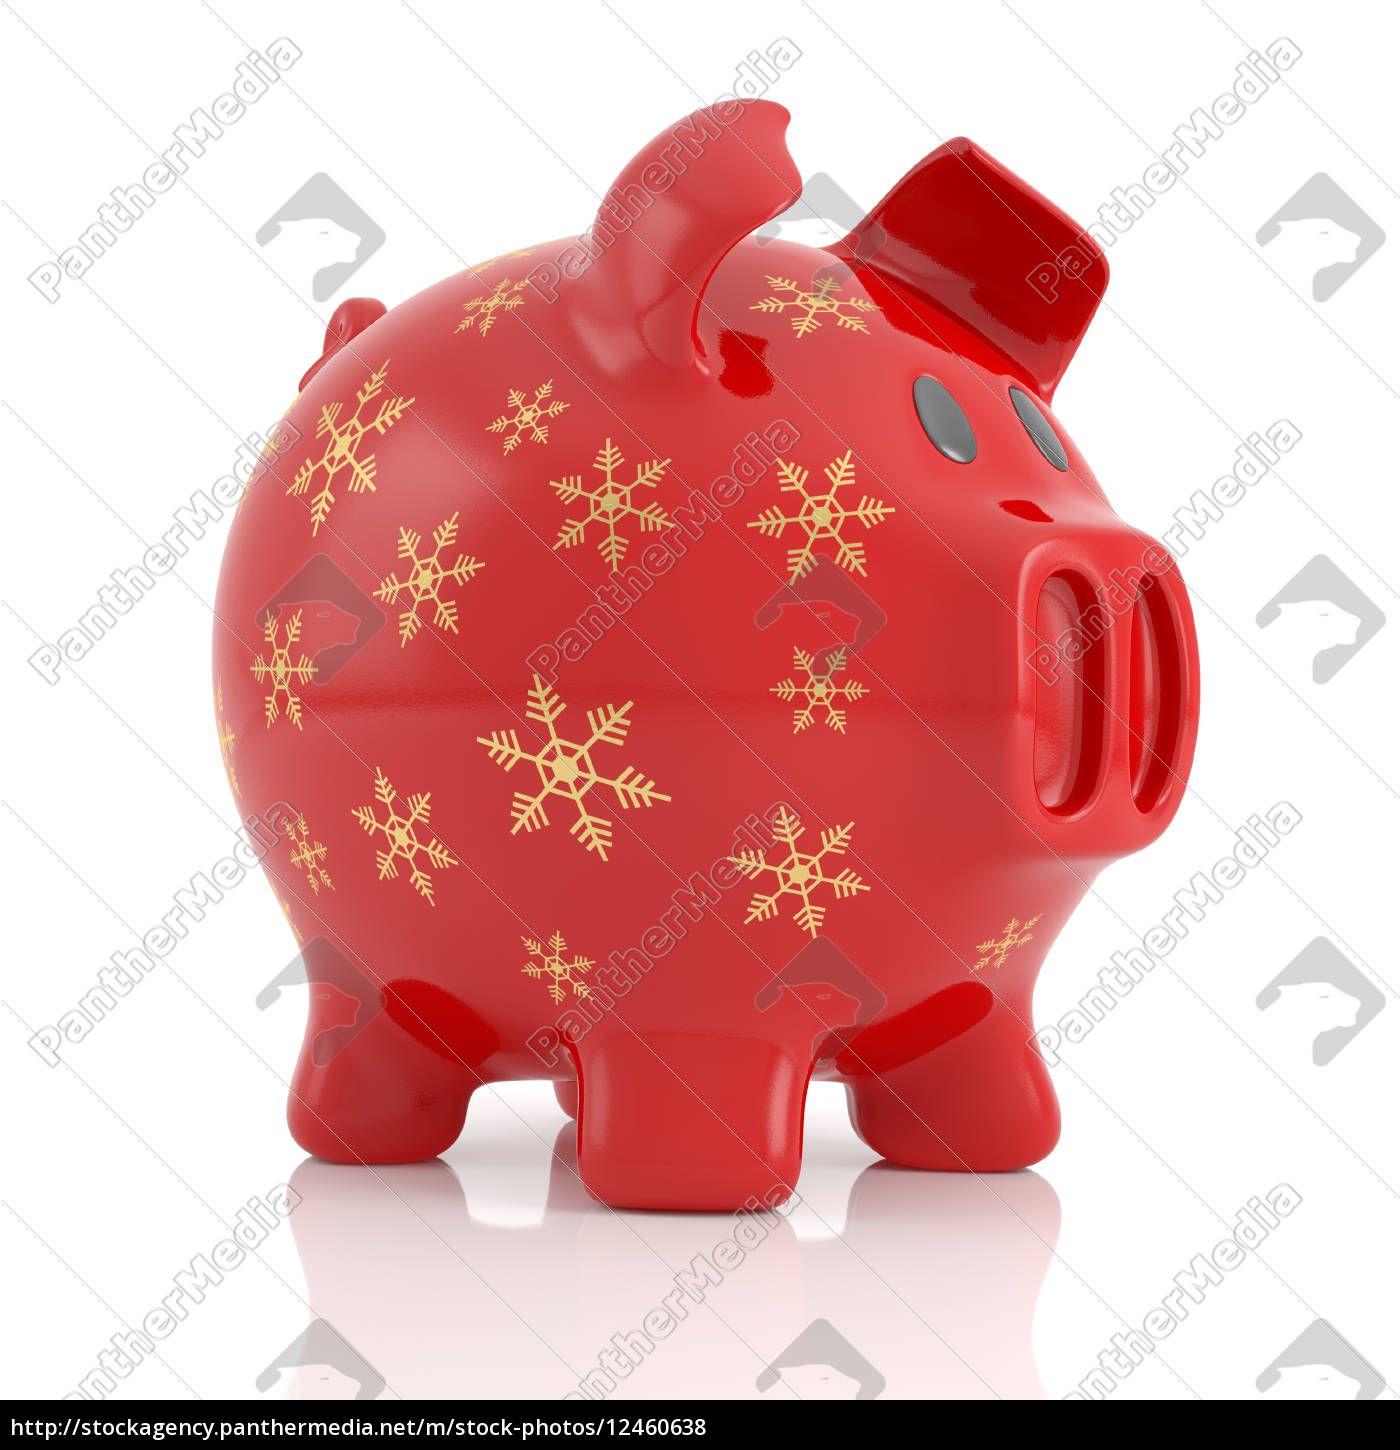 White Background with Red M Logo - red Christmas piggy bank on white background free image